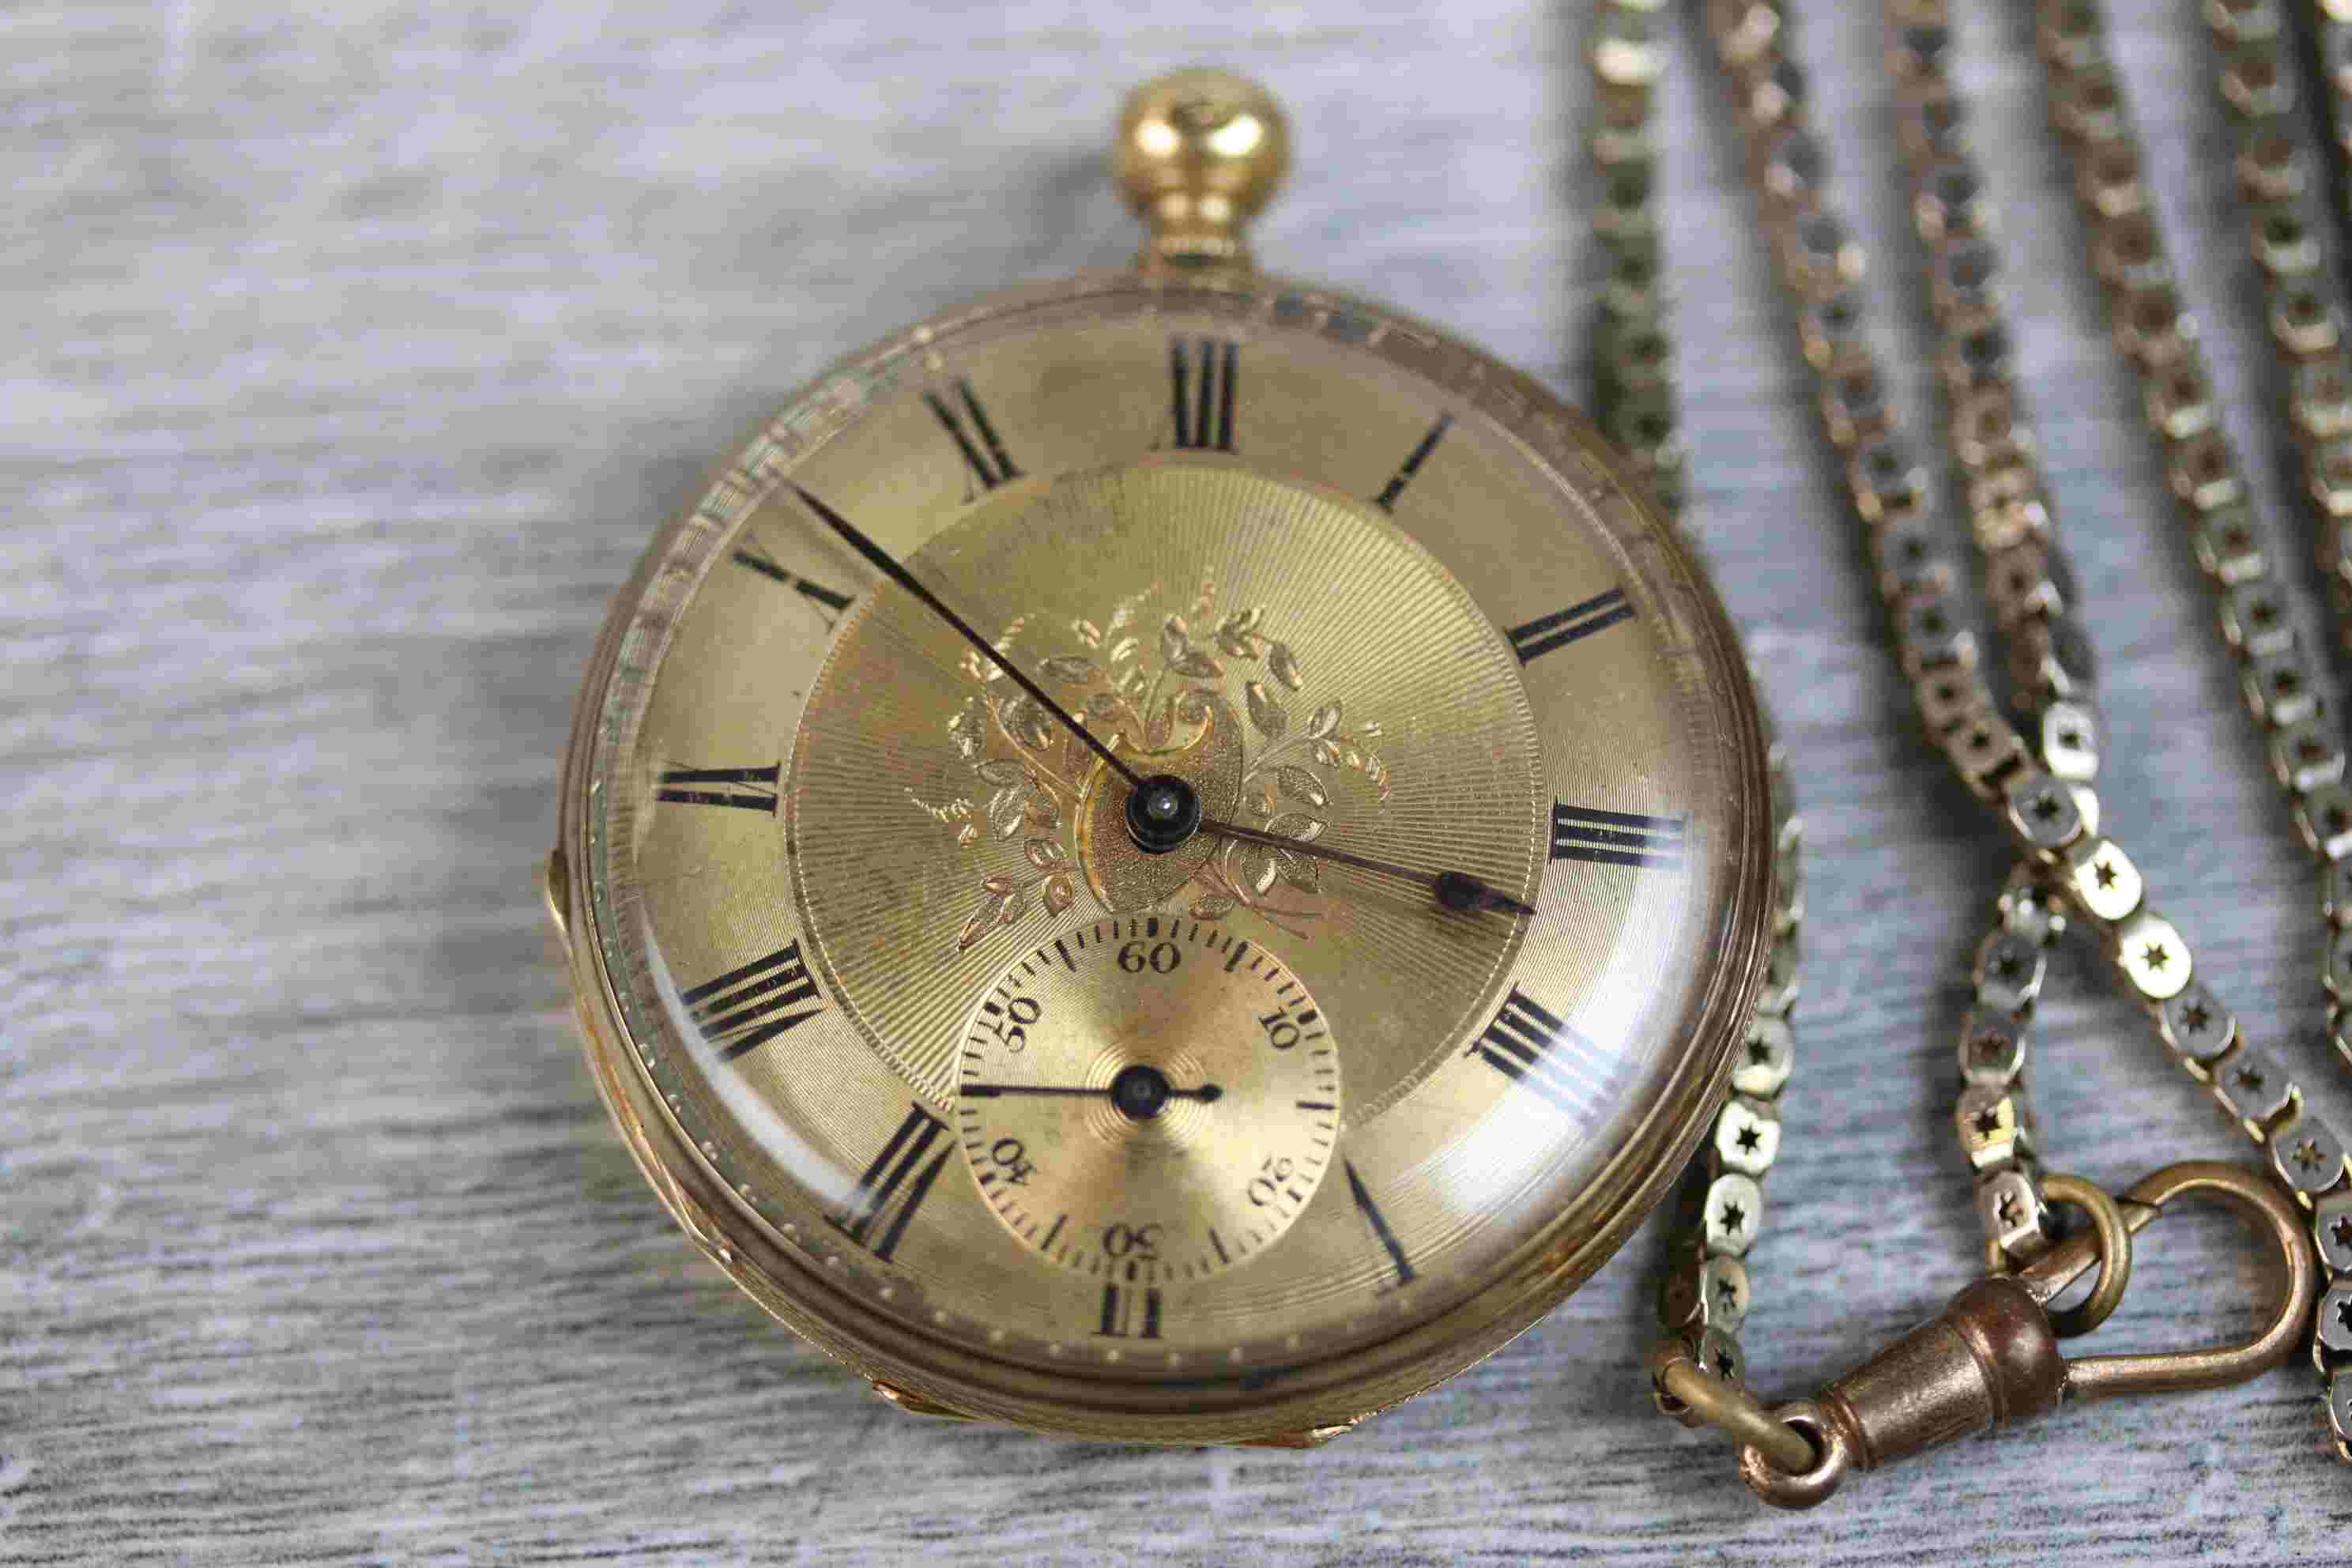 18ct yellow gold open faced key wind pocket watch, gilt engine turned dial and subsidiary dial, - Image 2 of 6